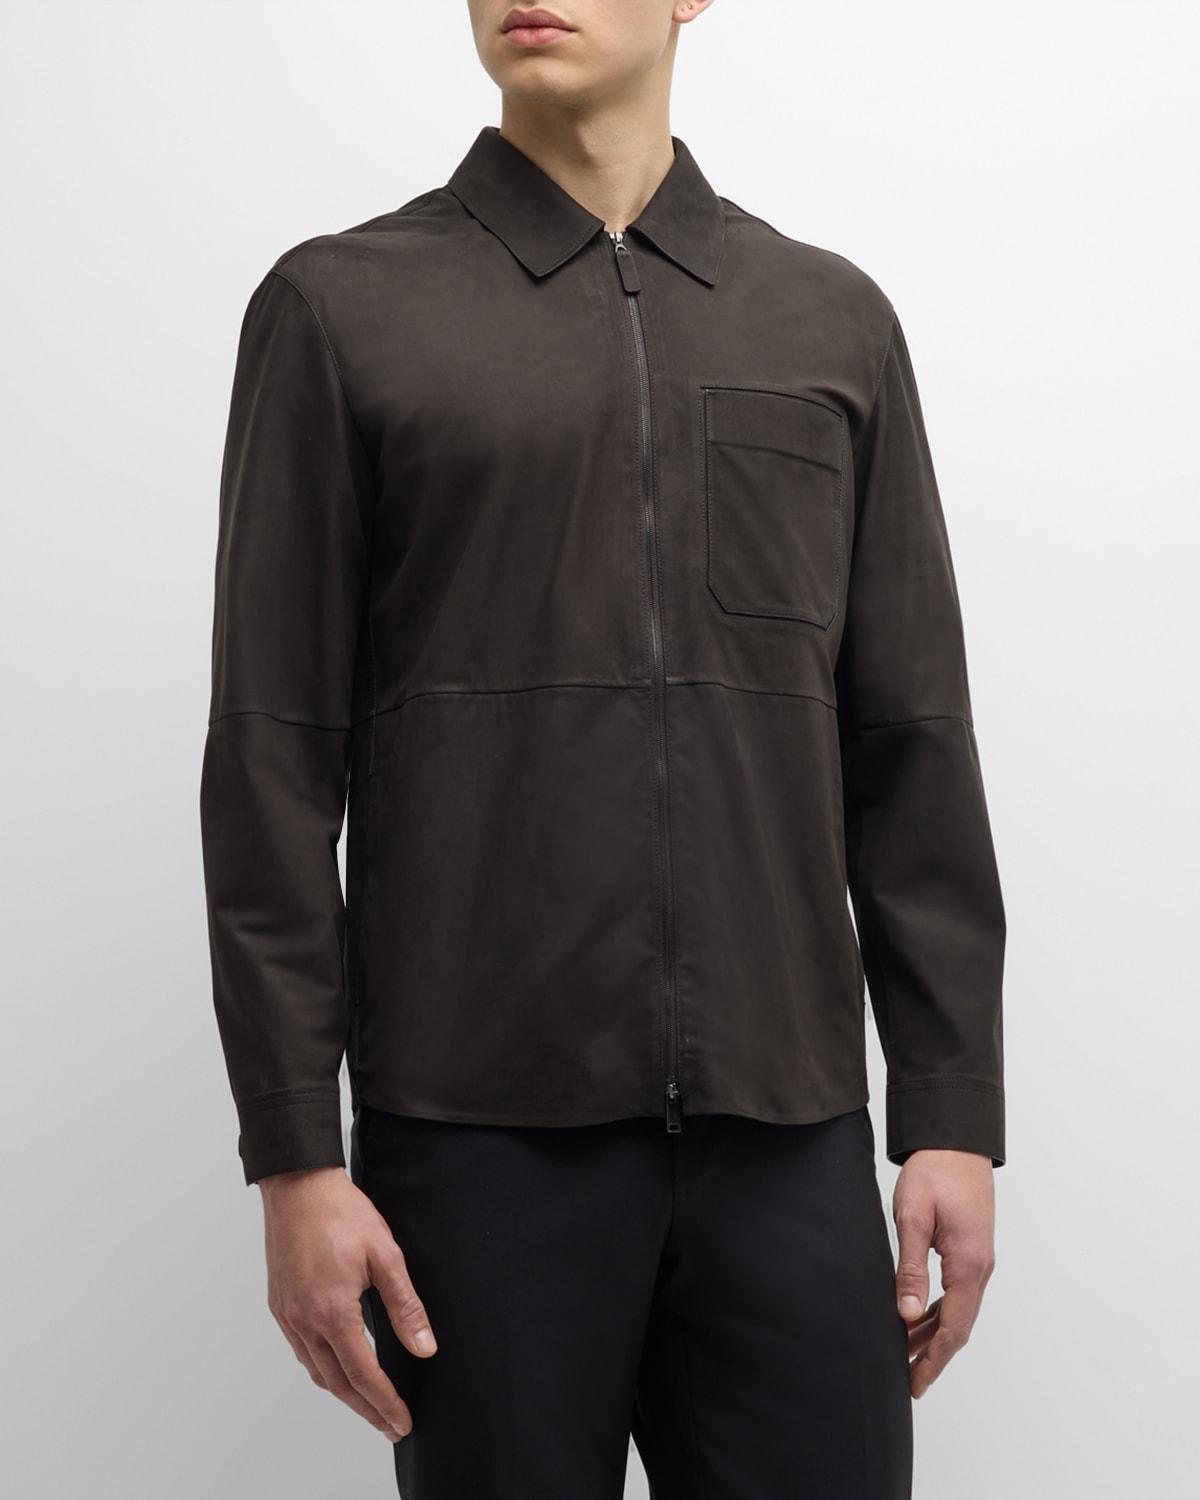 Mens Suede Full-Zip Overshirt Product Image